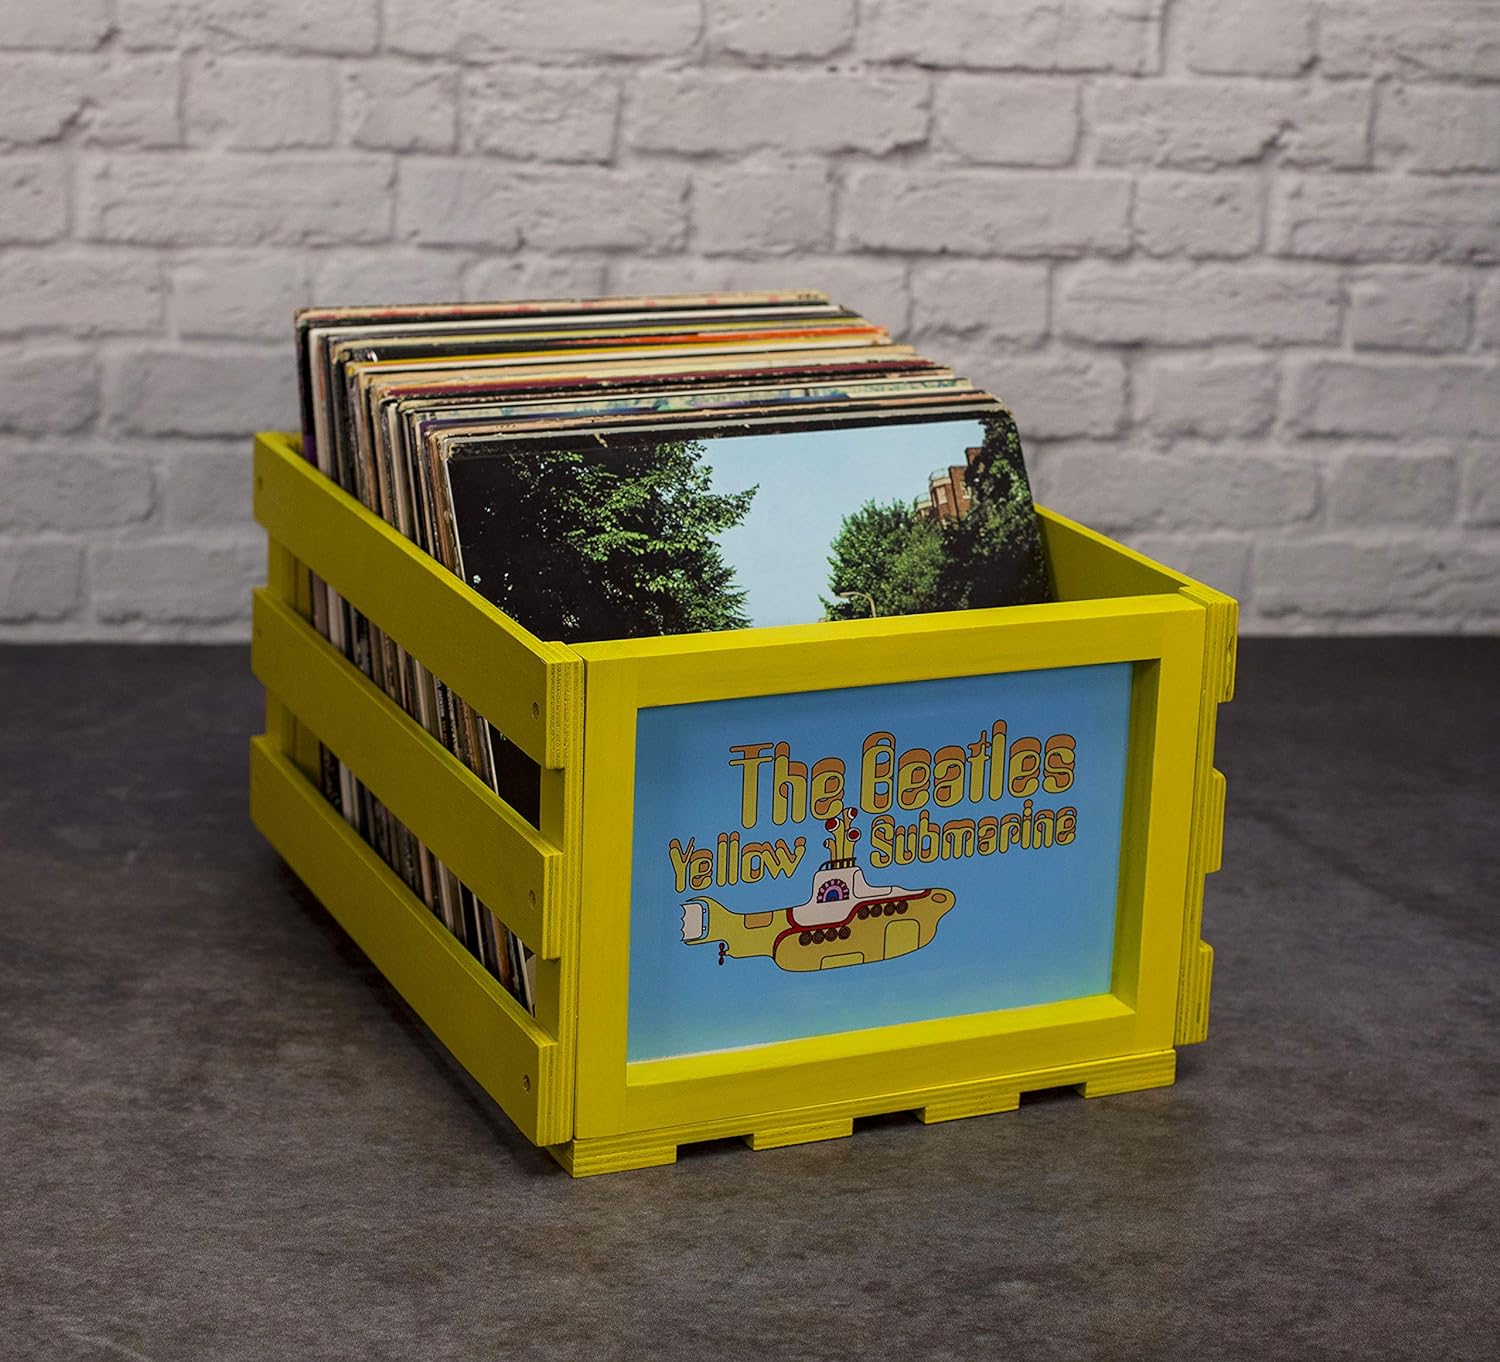 The Beatles Yellow Submarine - Crosley Vinyl Record Storage Crate Holds up to 75 Albums - Free Tracked Shipping